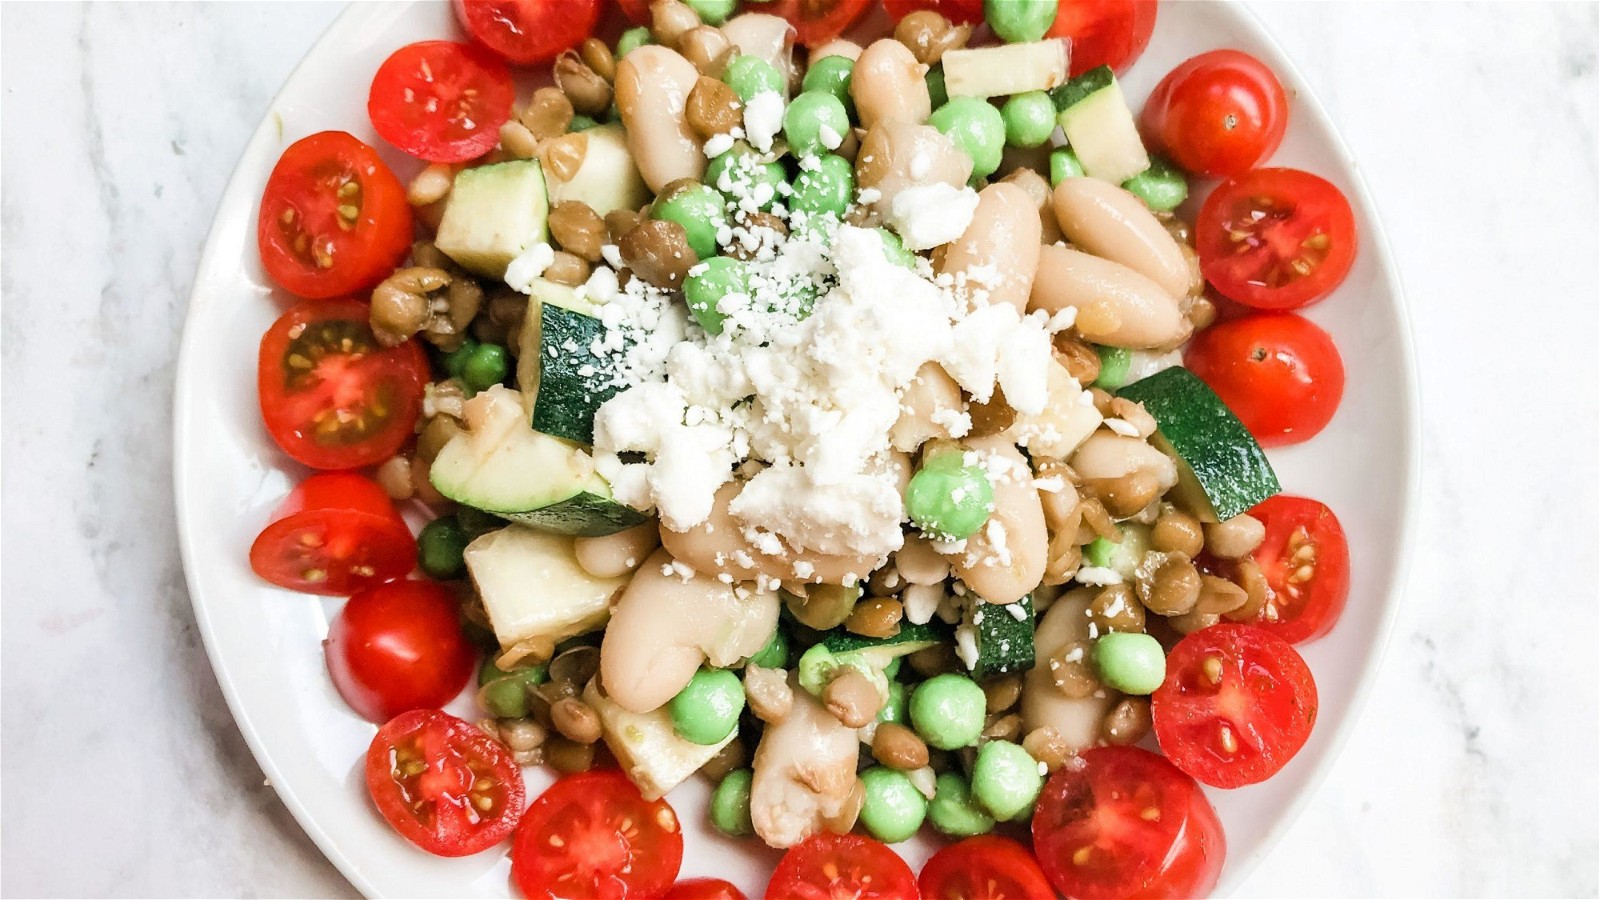 Image of Mixed bean and lentil salad